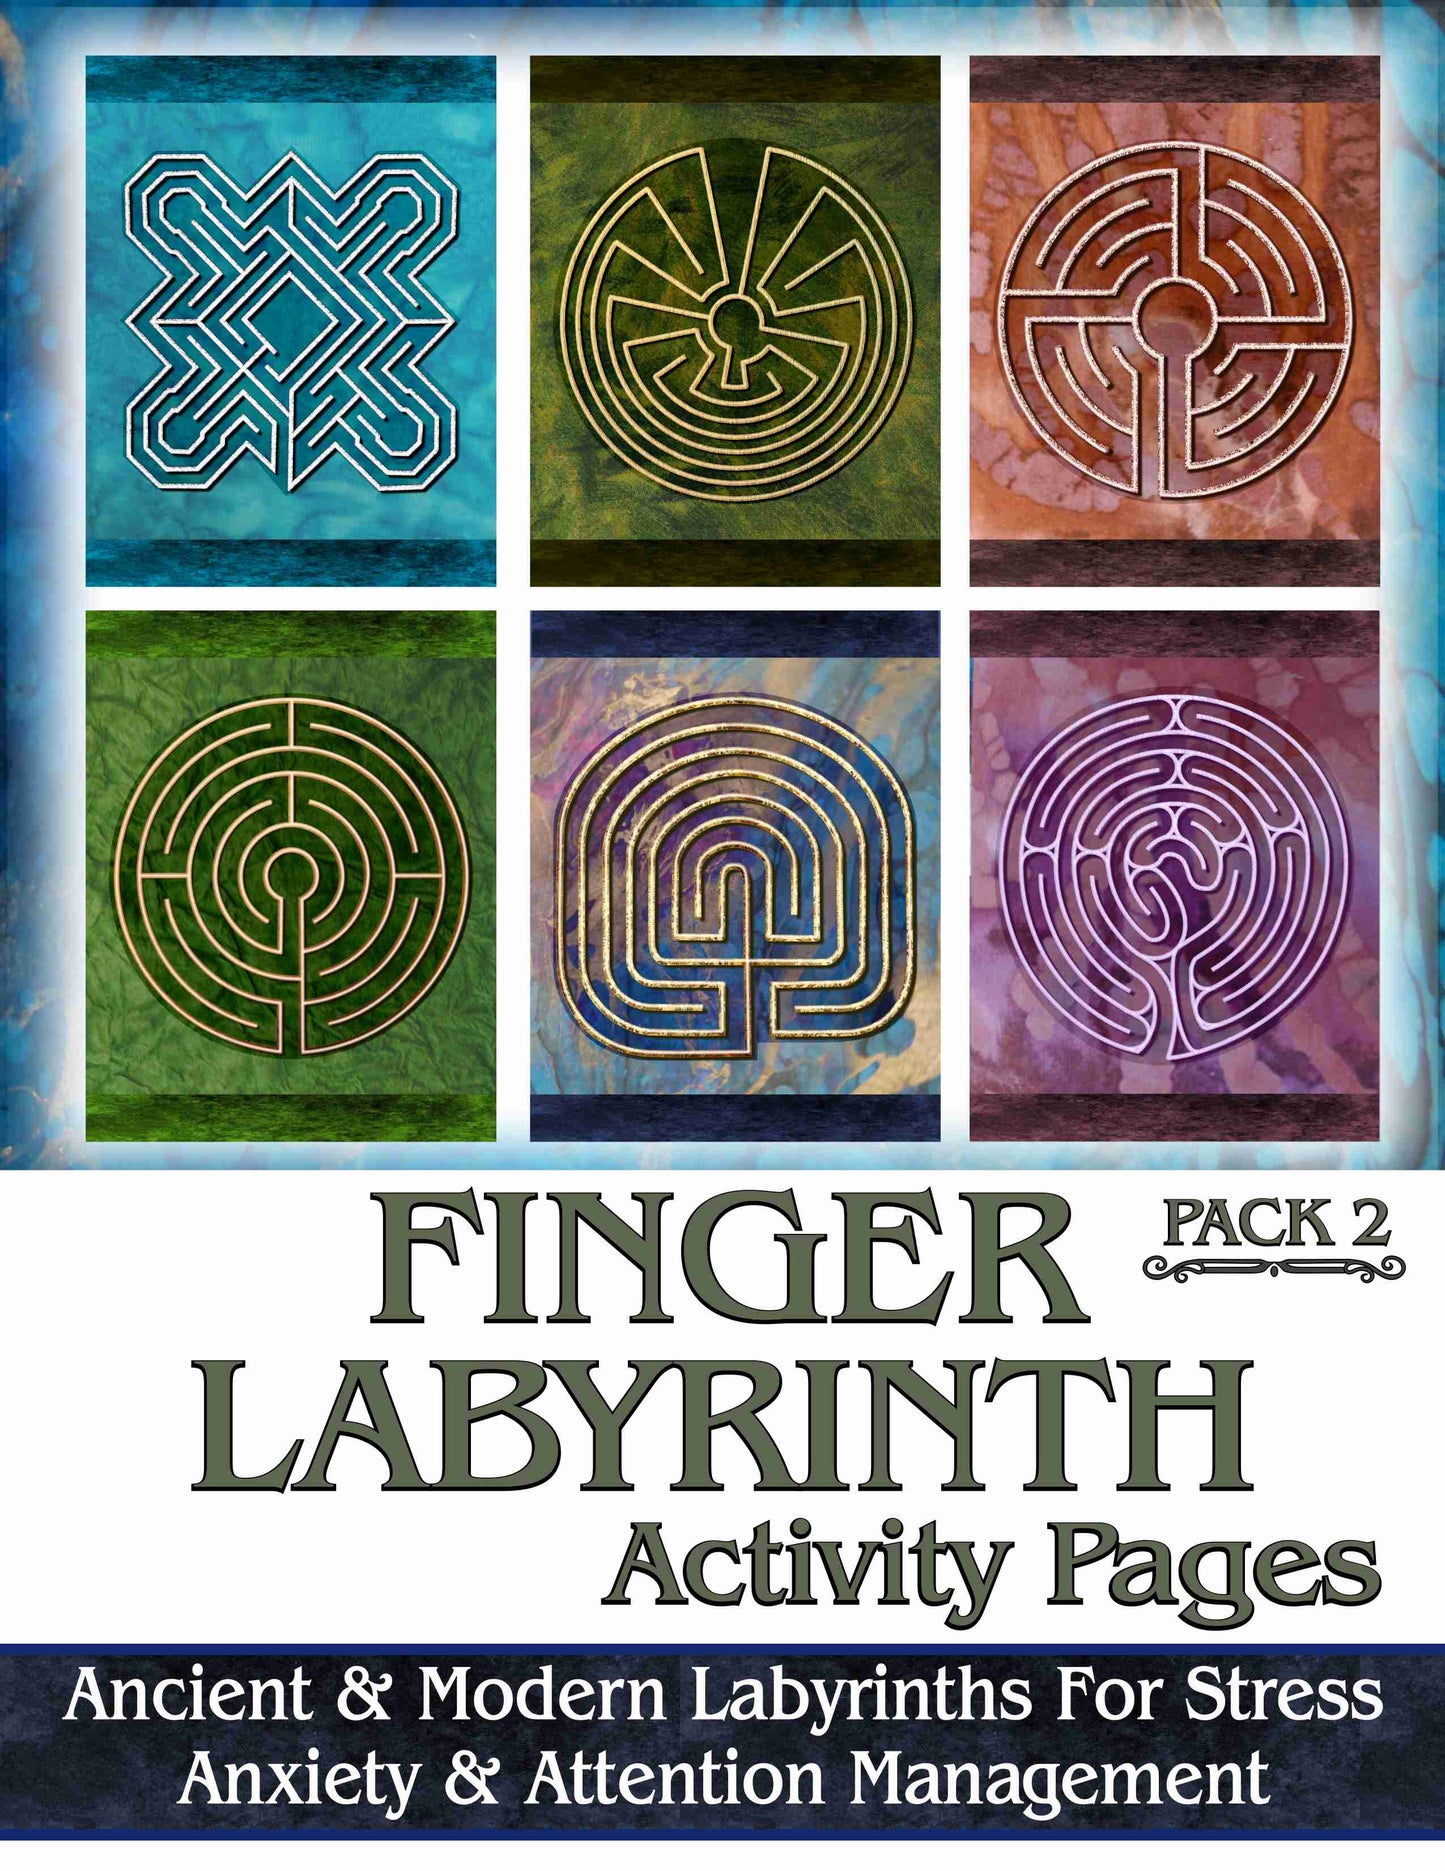 Finger Labyrinth Activity Pages Pack 2: Mindful Tracing Art